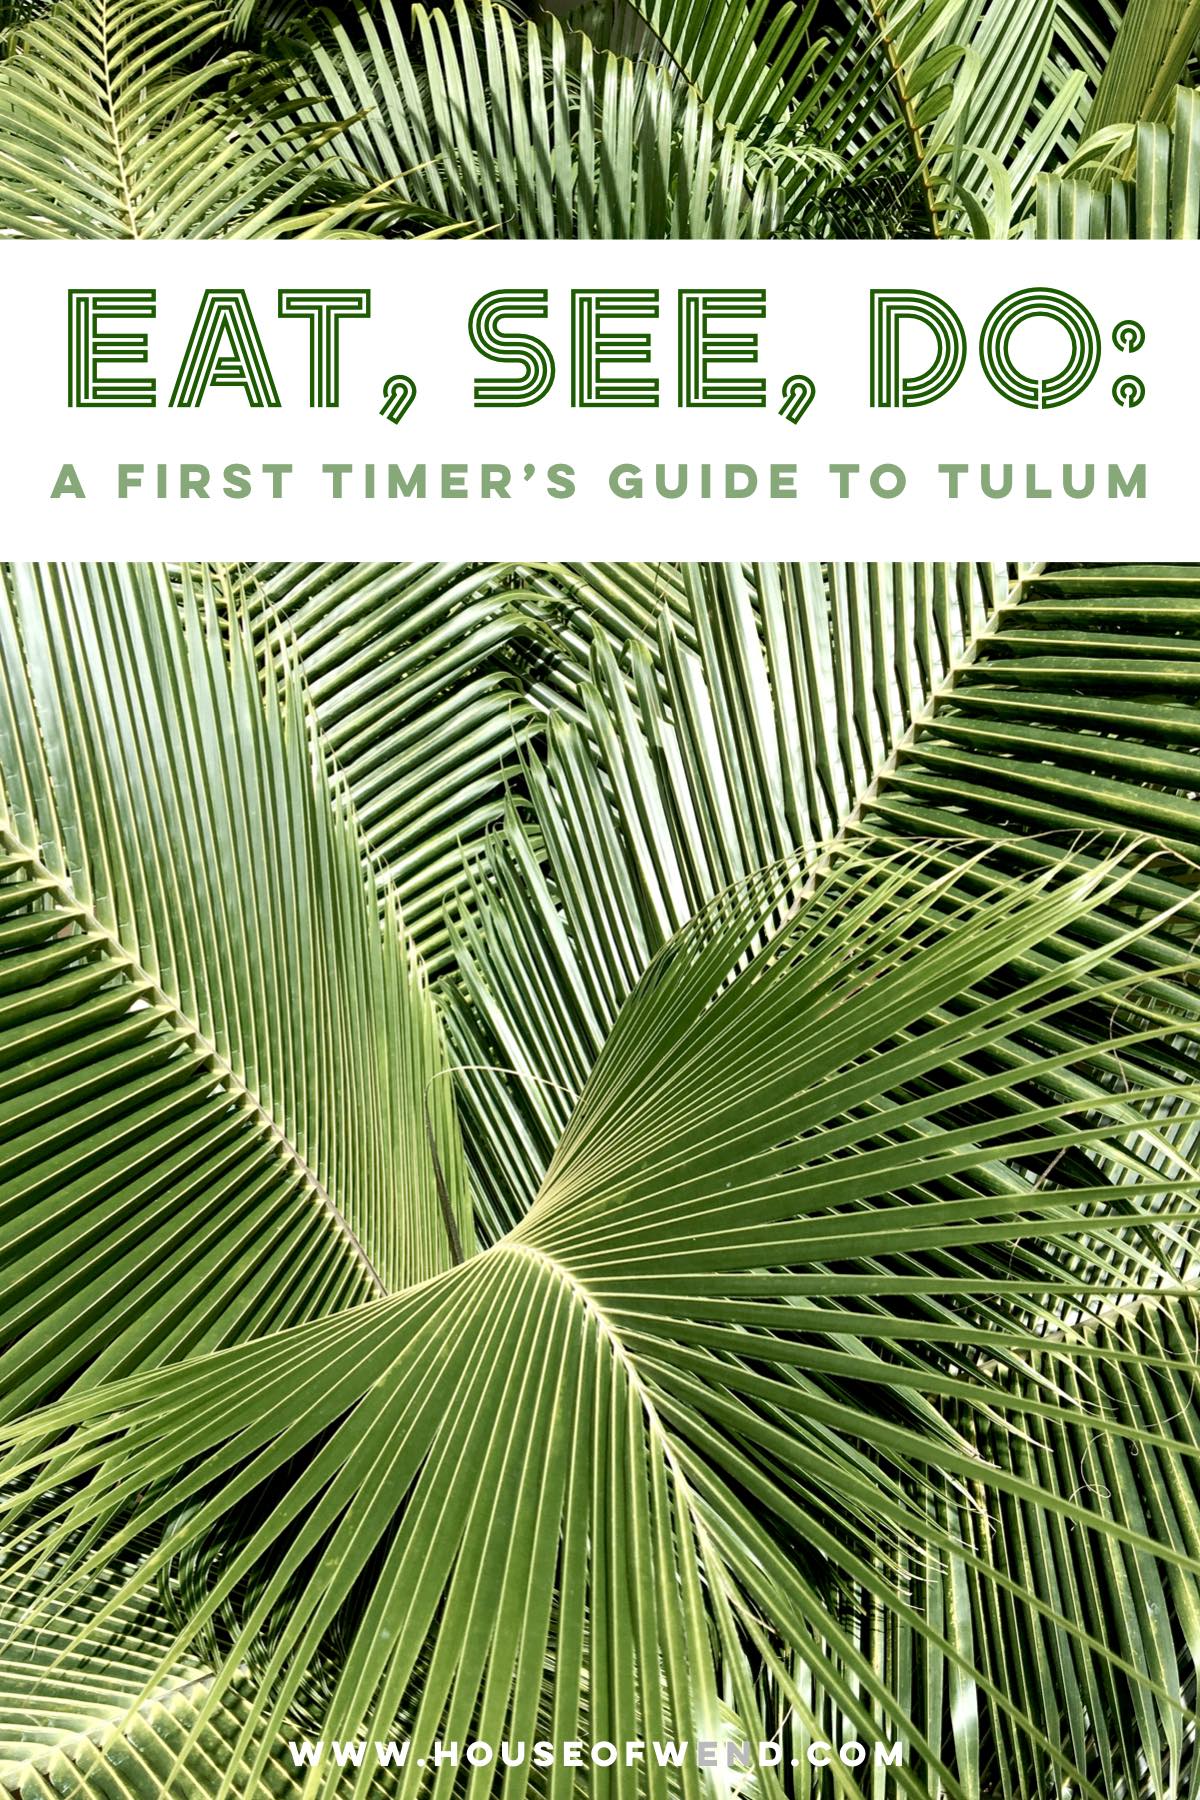 Eat, see, do a first timer's guide to Tulum, Mexico